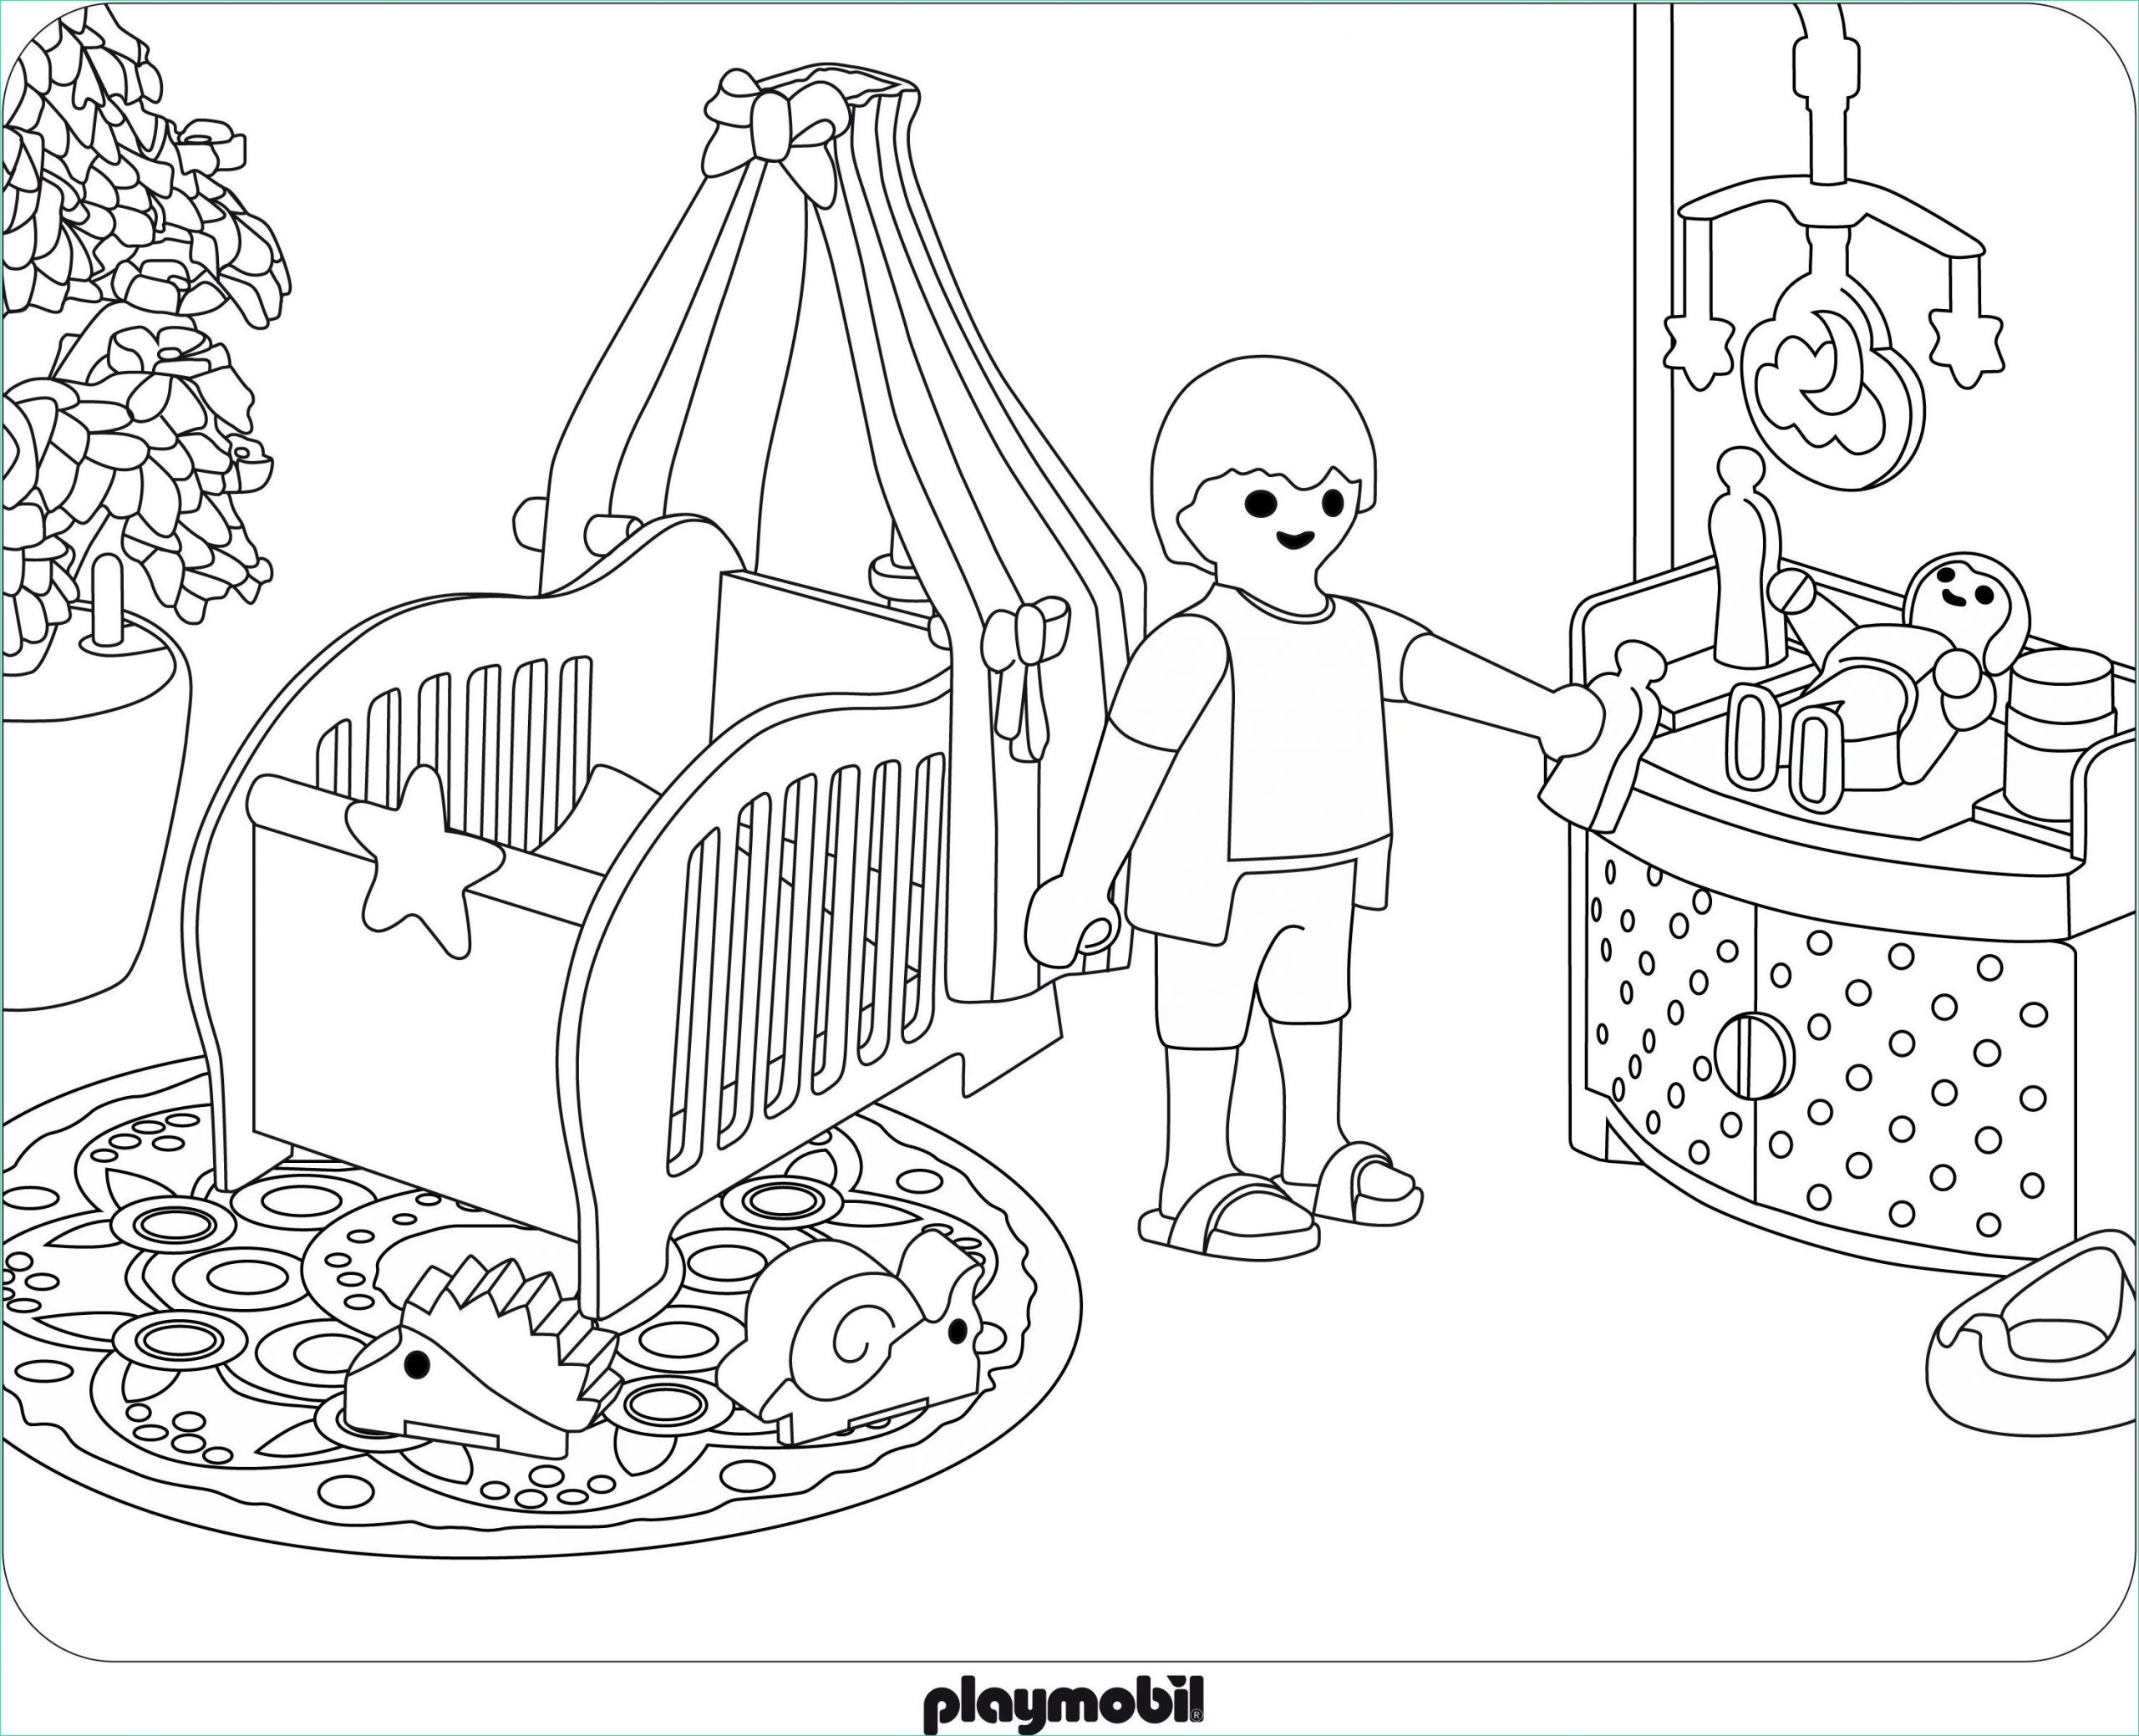 Playmobil Dessin Inspirant Collection Coloriage Playmobil Jouet Coloriagede In 2020